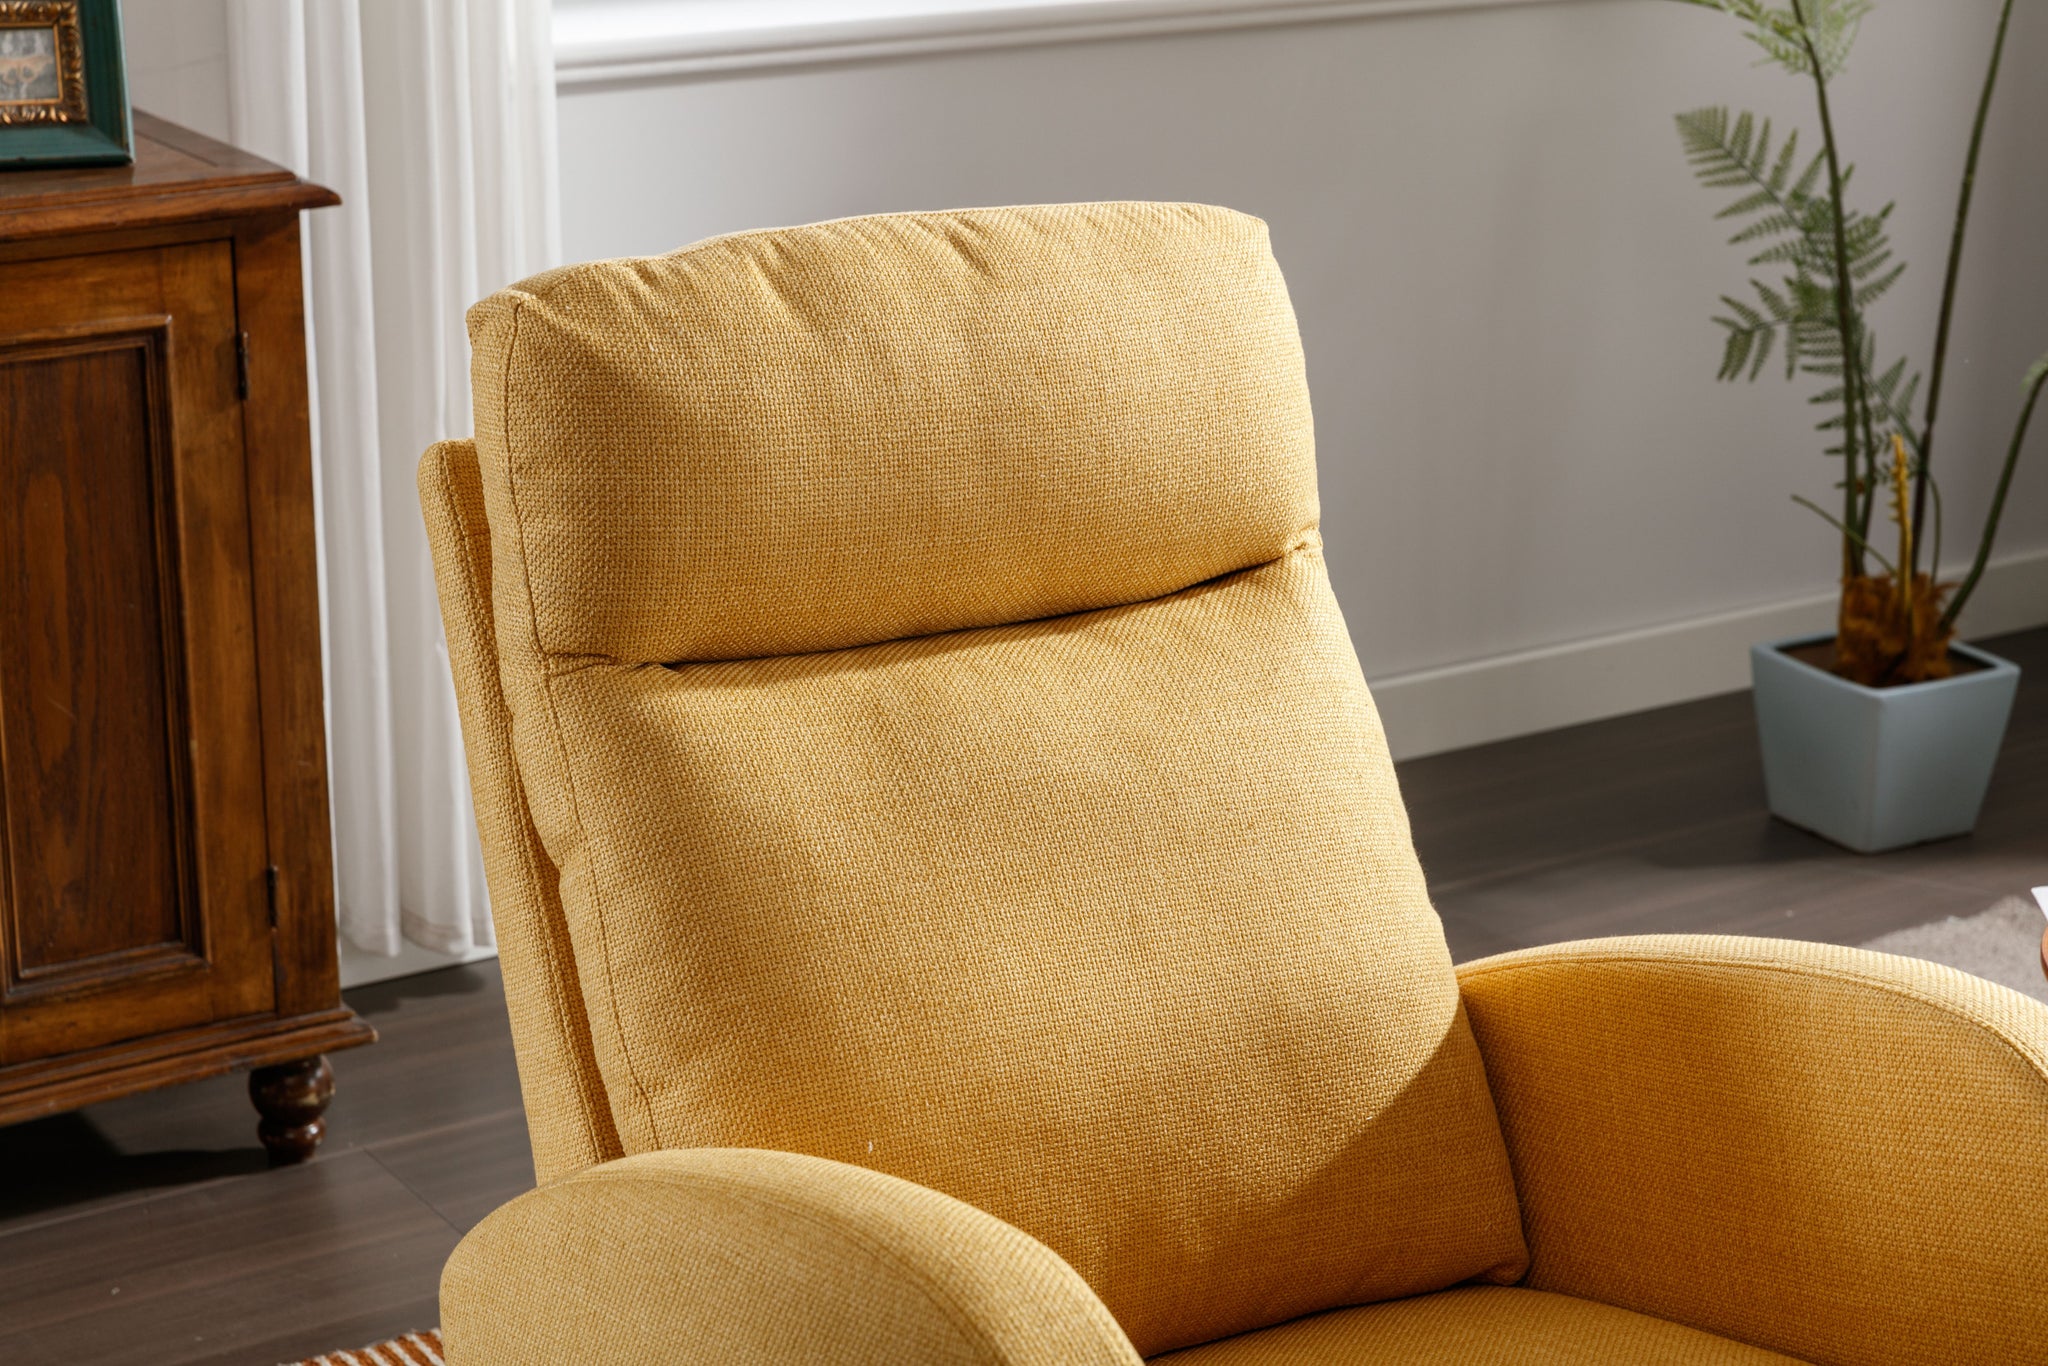 COOLMORE living room Comfortable rocking chair living yellow-linen